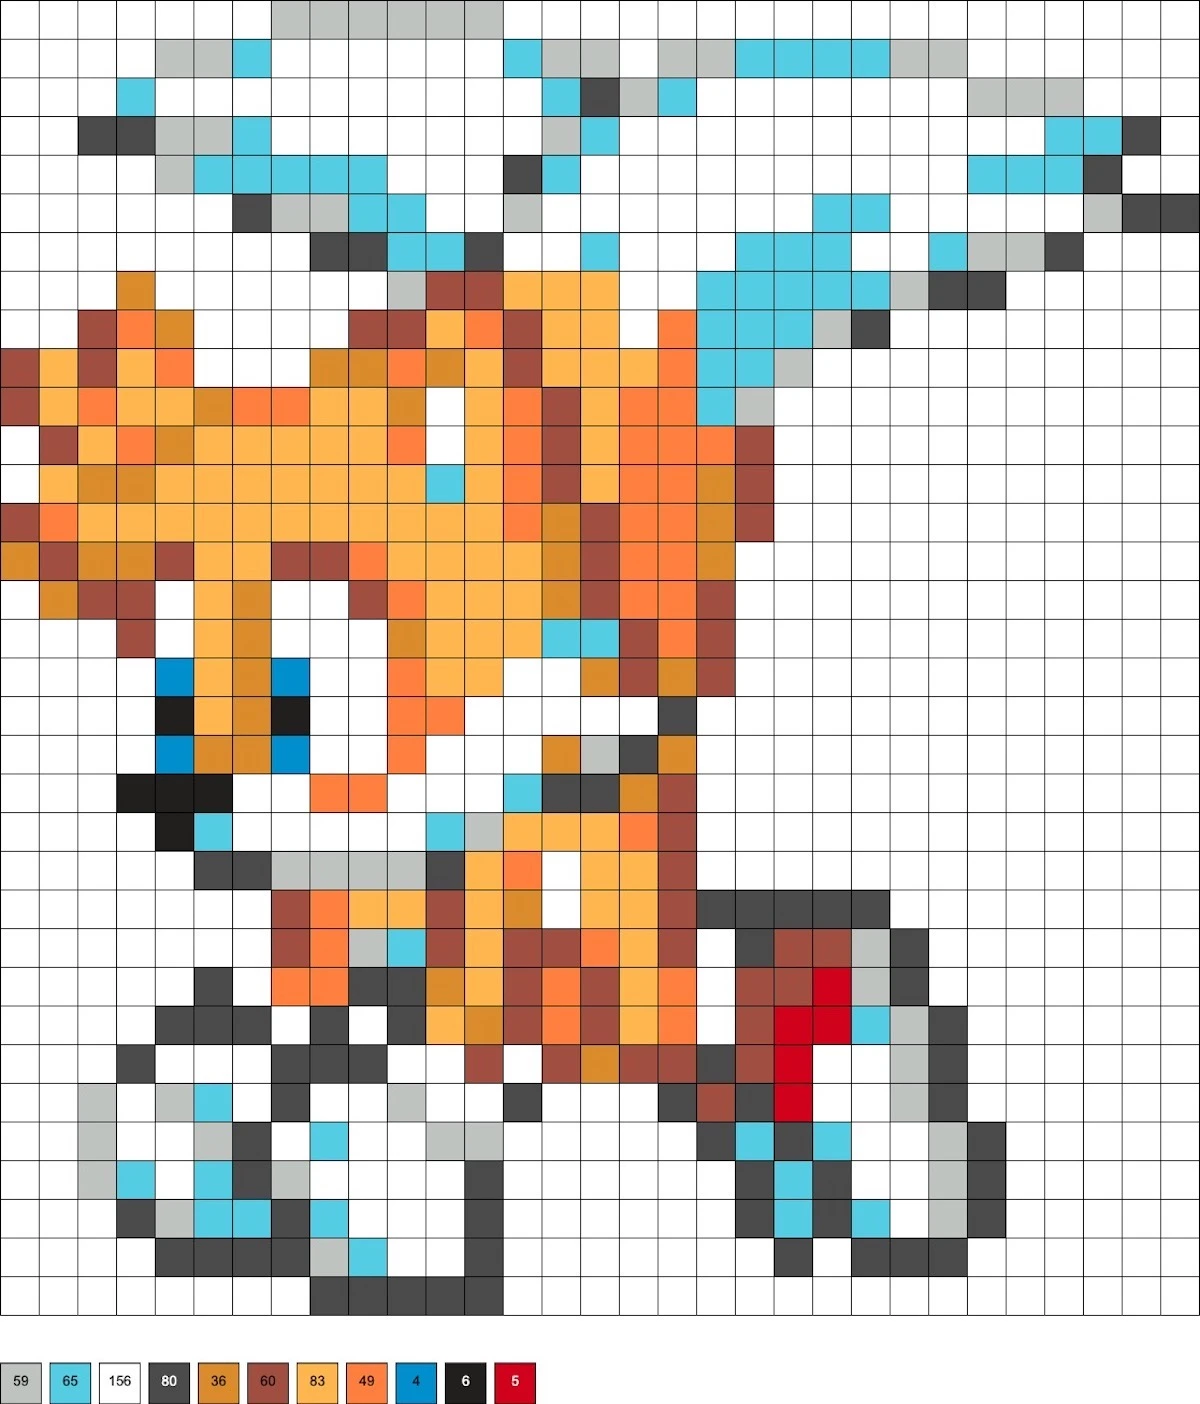 sonic.exe vs tails Project by Sand Heat